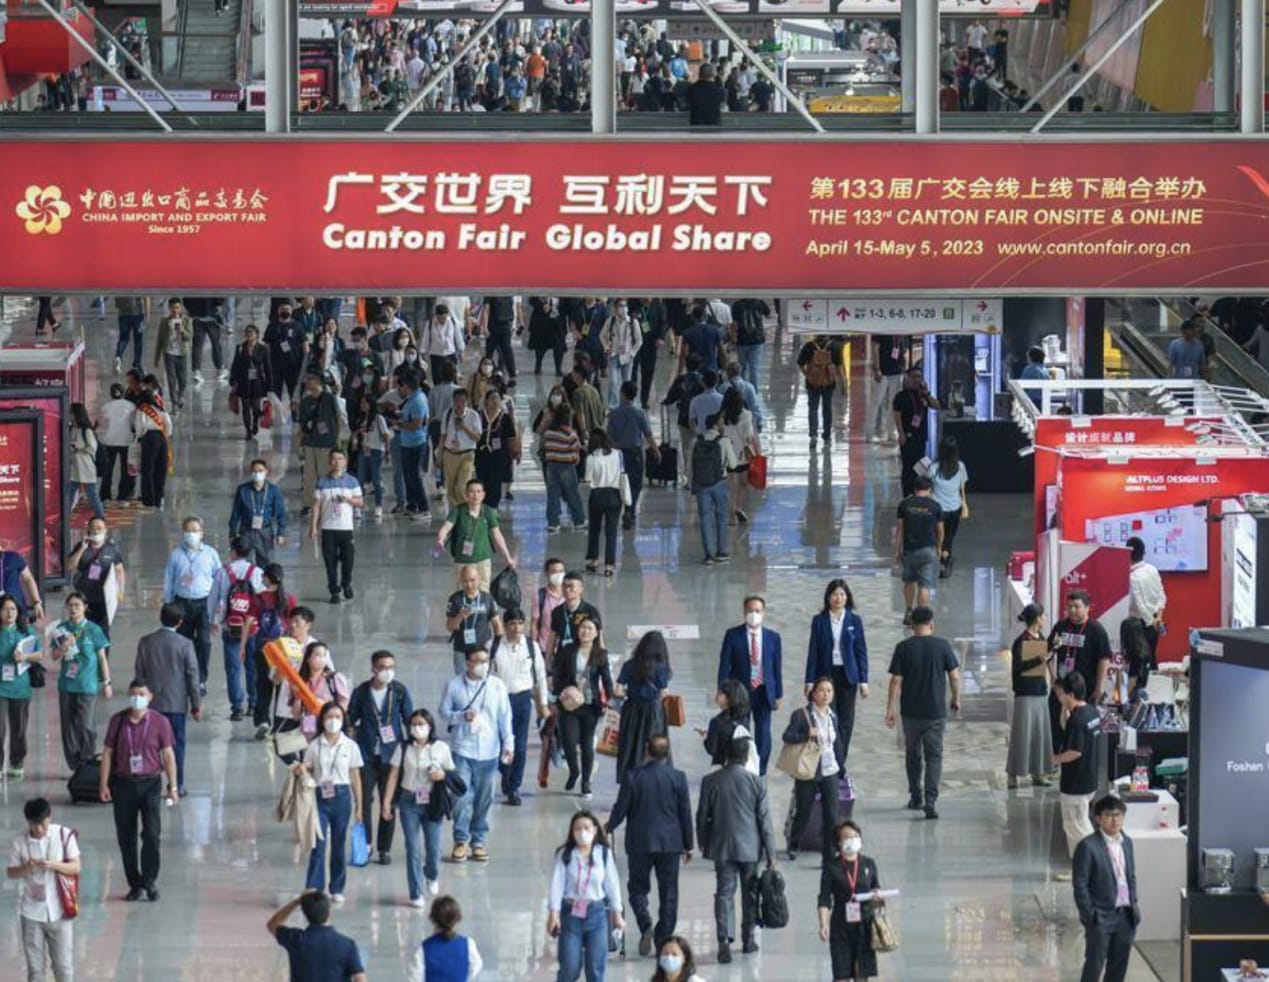 The 133rd Canton Fair received great attention (3)